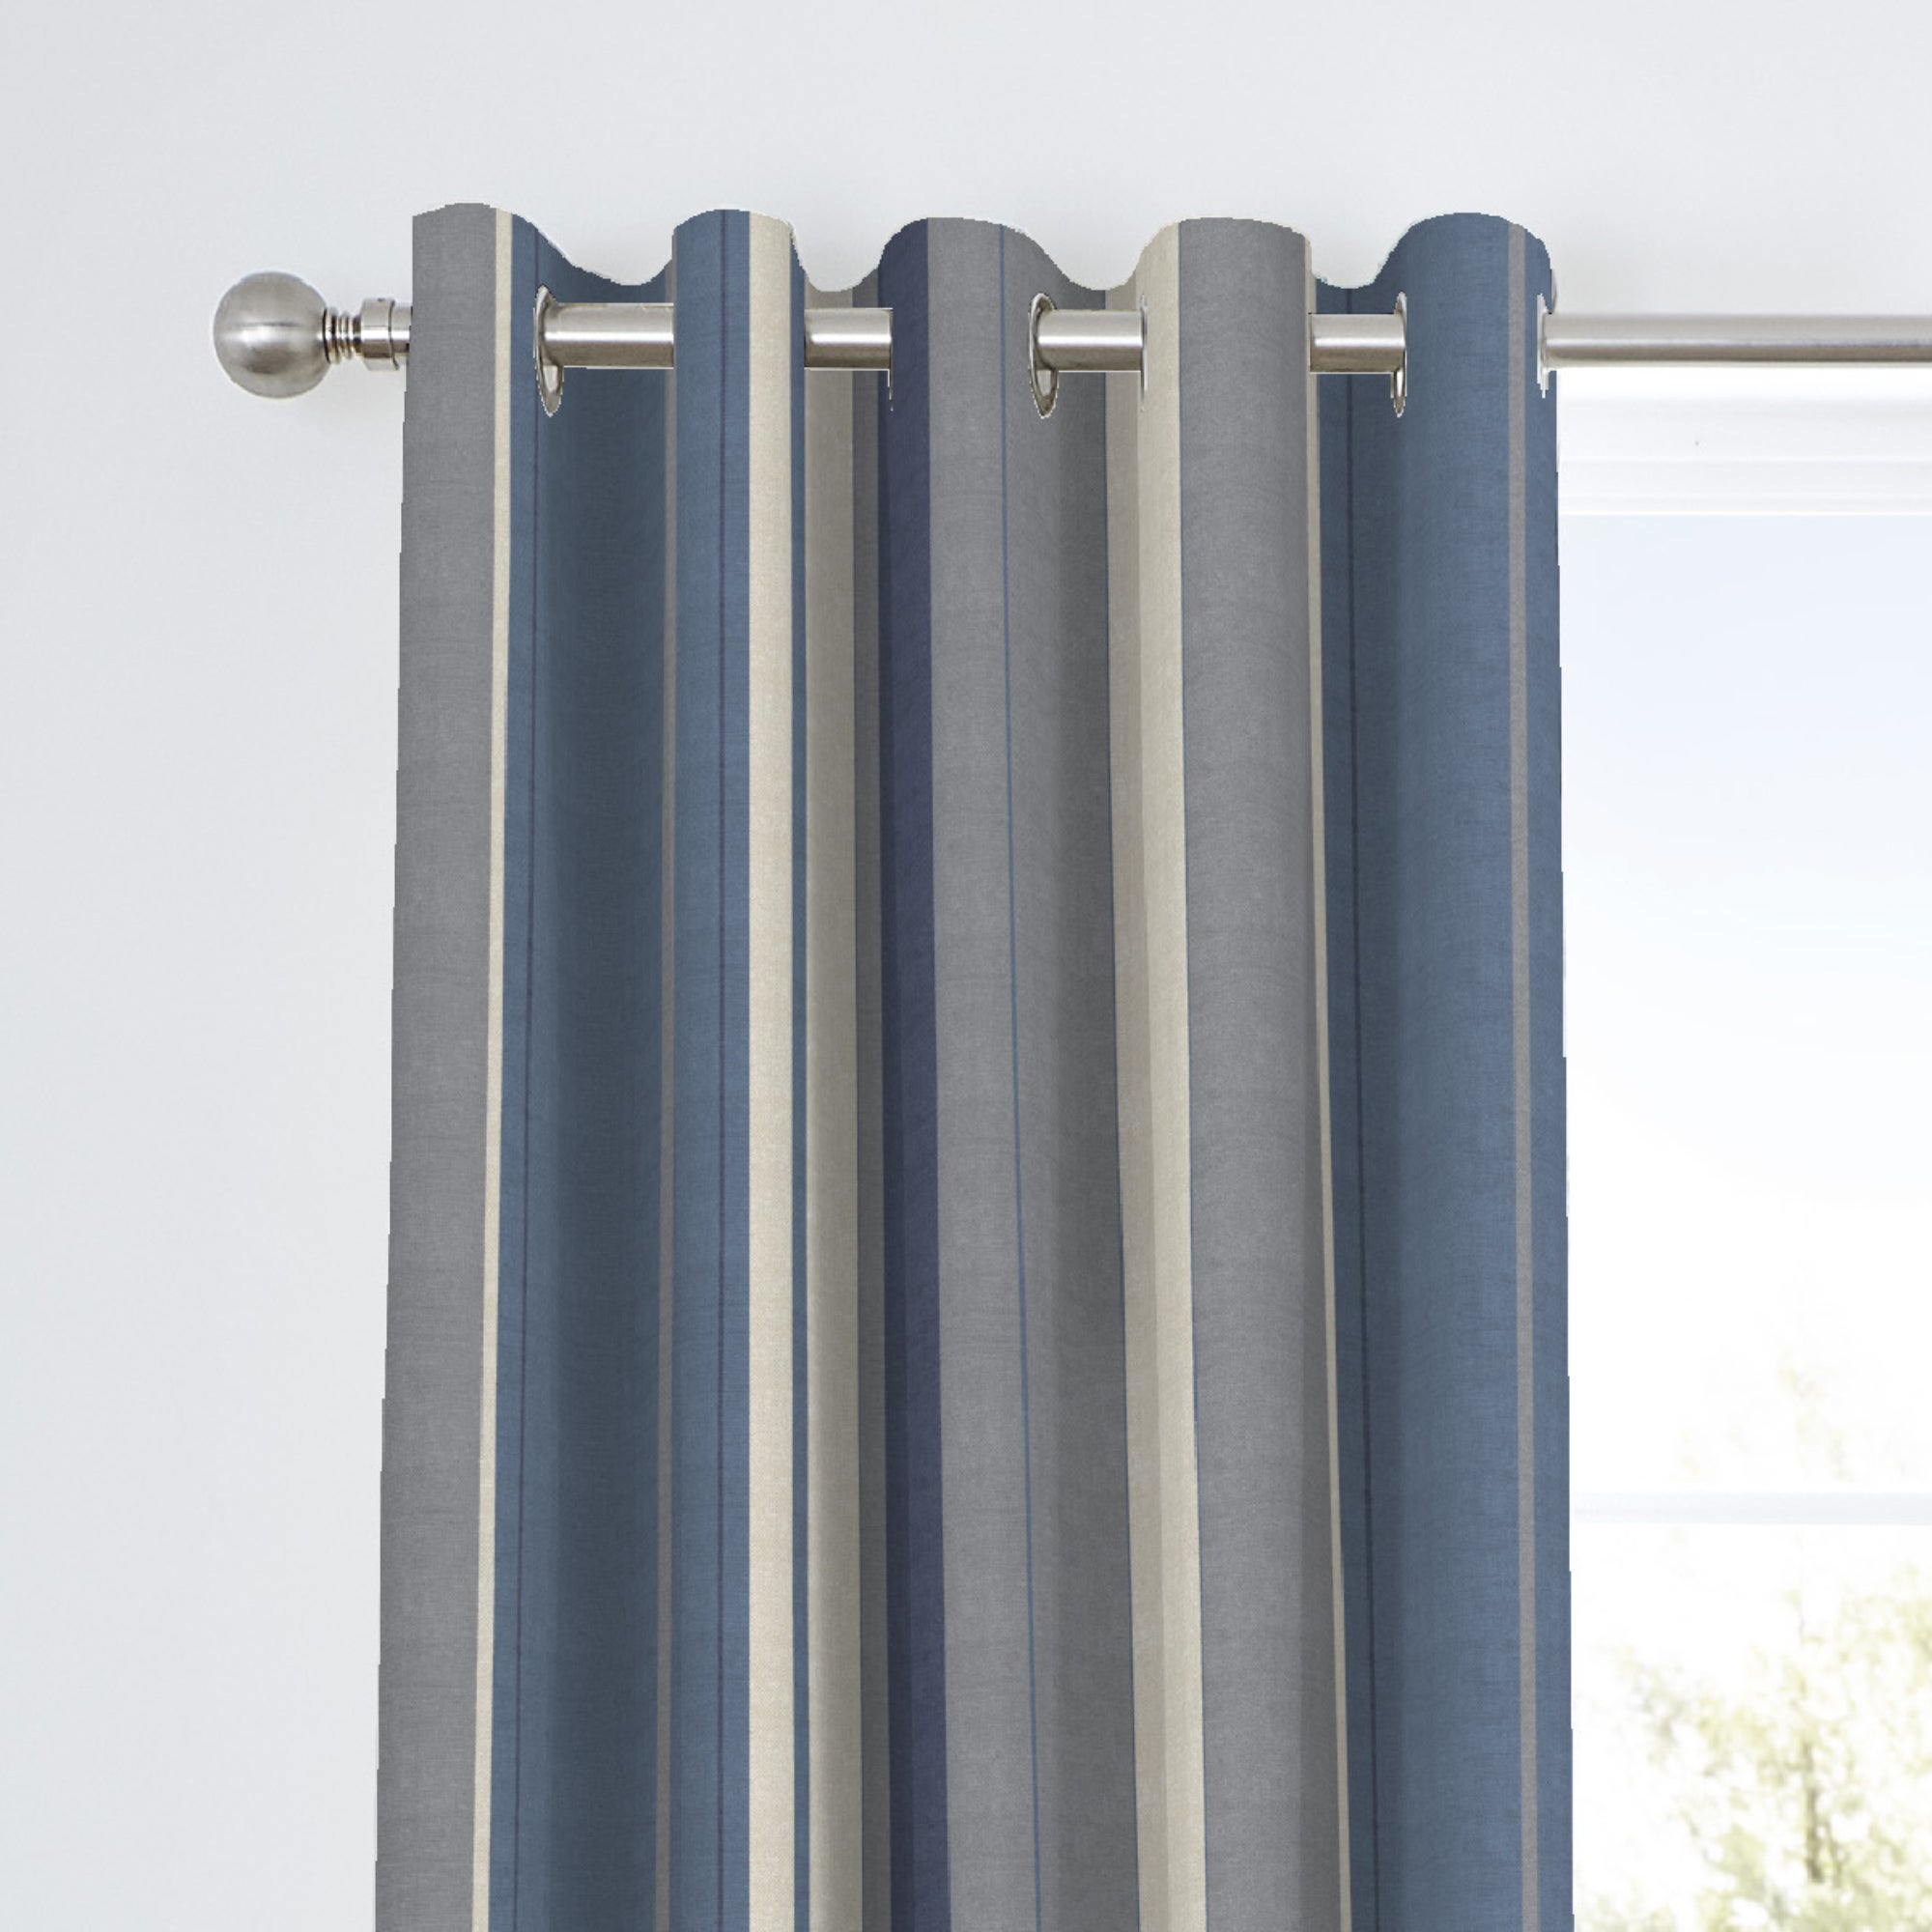 Photos - Curtains & Drapes Fusion Whitworth Striped Blue Eyelet Curtains Blue, Grey and Cream 